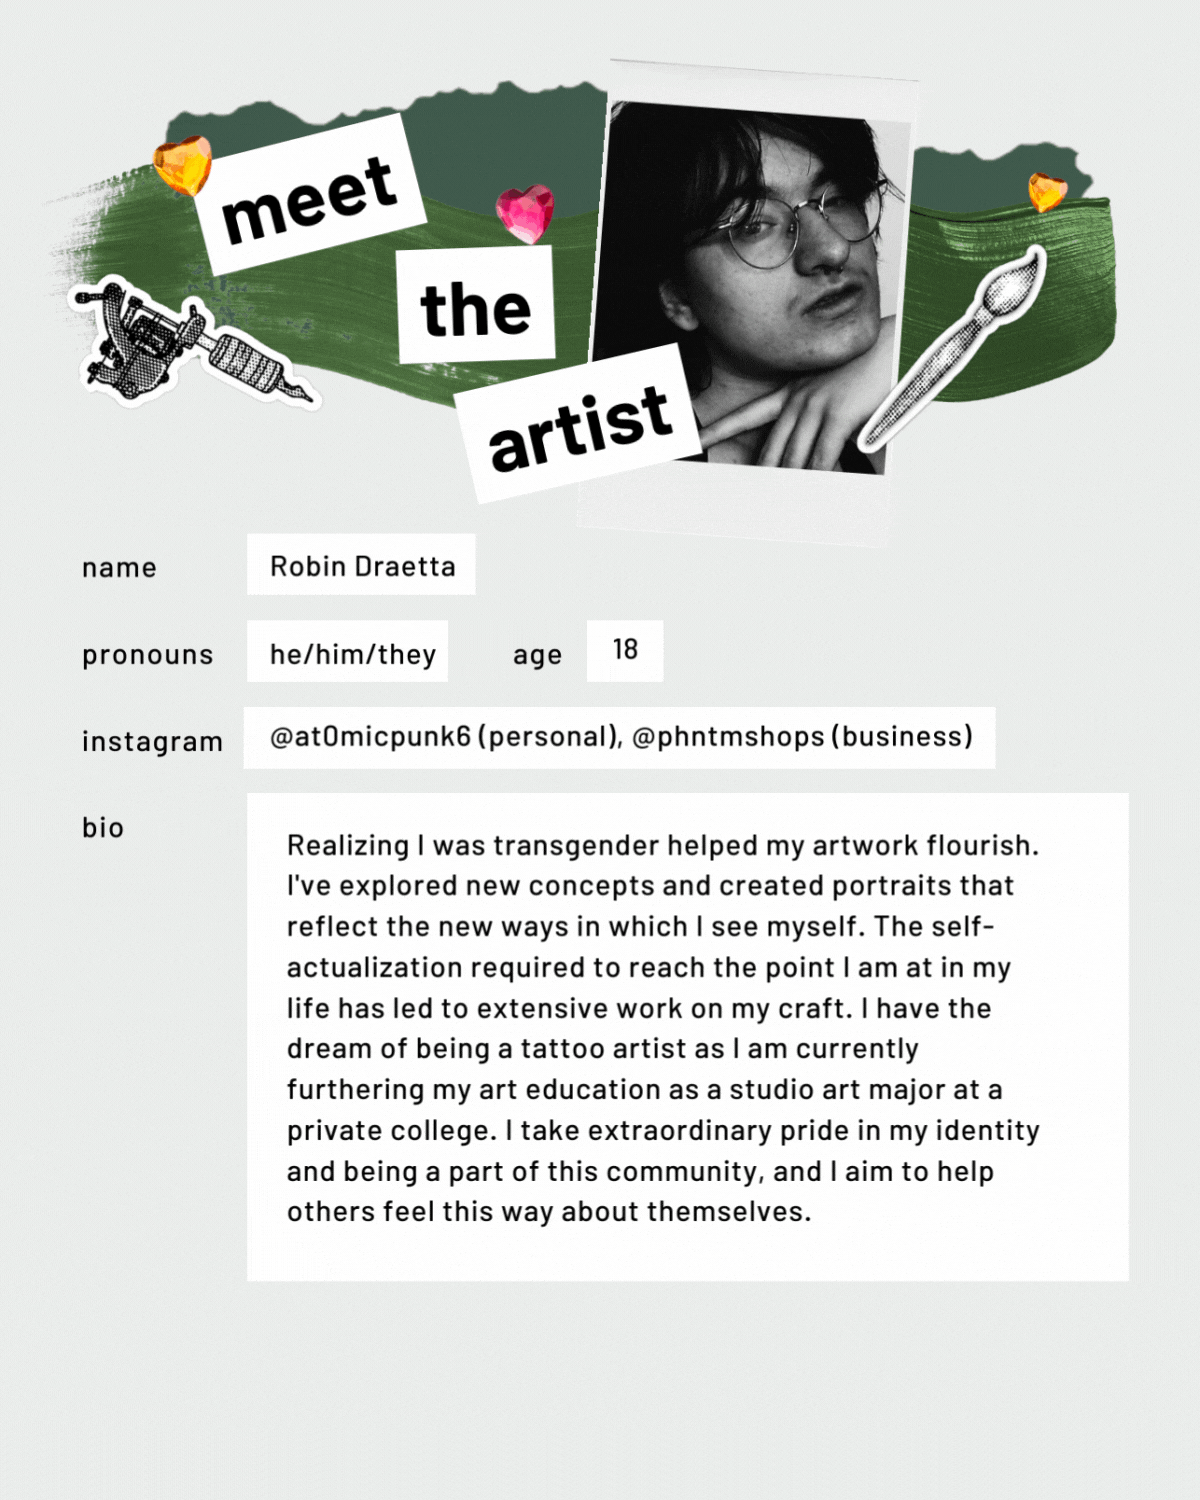 Meet the artist page with a photo. Name: Robin Draetta. Pronouns: he/him/they. Age: 18. Bio: Realizing I was transgender helped my artwork flourish. I've explored new concepts and created portraits that reflect the new ways in which I see myself. The self-actualization required to reach the point I am at in my life has led to extensive work on my craft. I have the dream of being a tattoo artist as I am currently furthering my art education as a studio art major at a private college. I take extraordinary pride in my identity and being a part of this community, and I aim to help others feel this way about themselves.